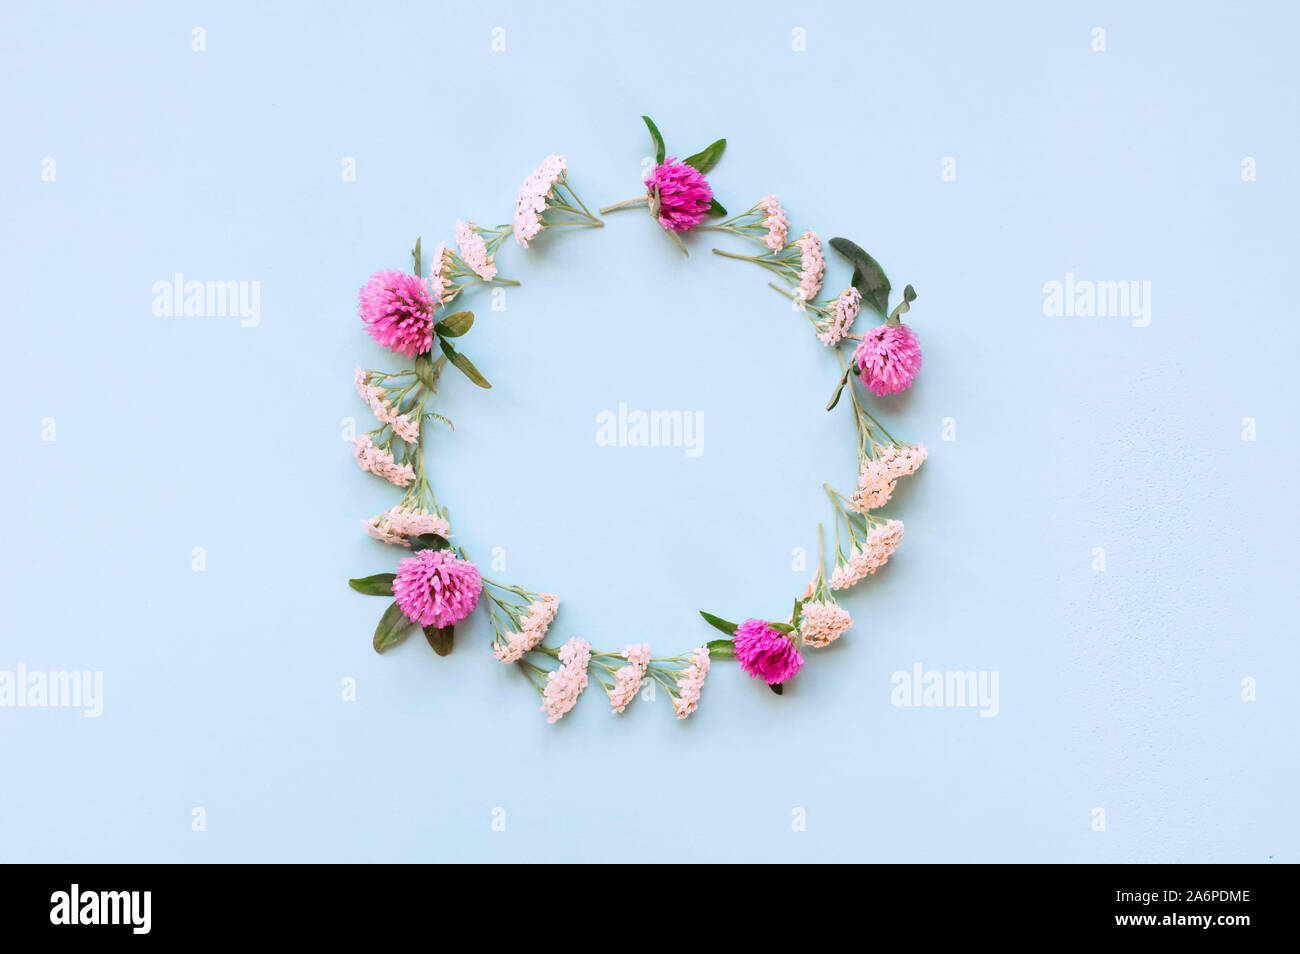 Flower composition. Round frame of wildflowers on a light blue background. Flat lay. Copy space Mock up template for greeting card, text lettering or Stock Photo